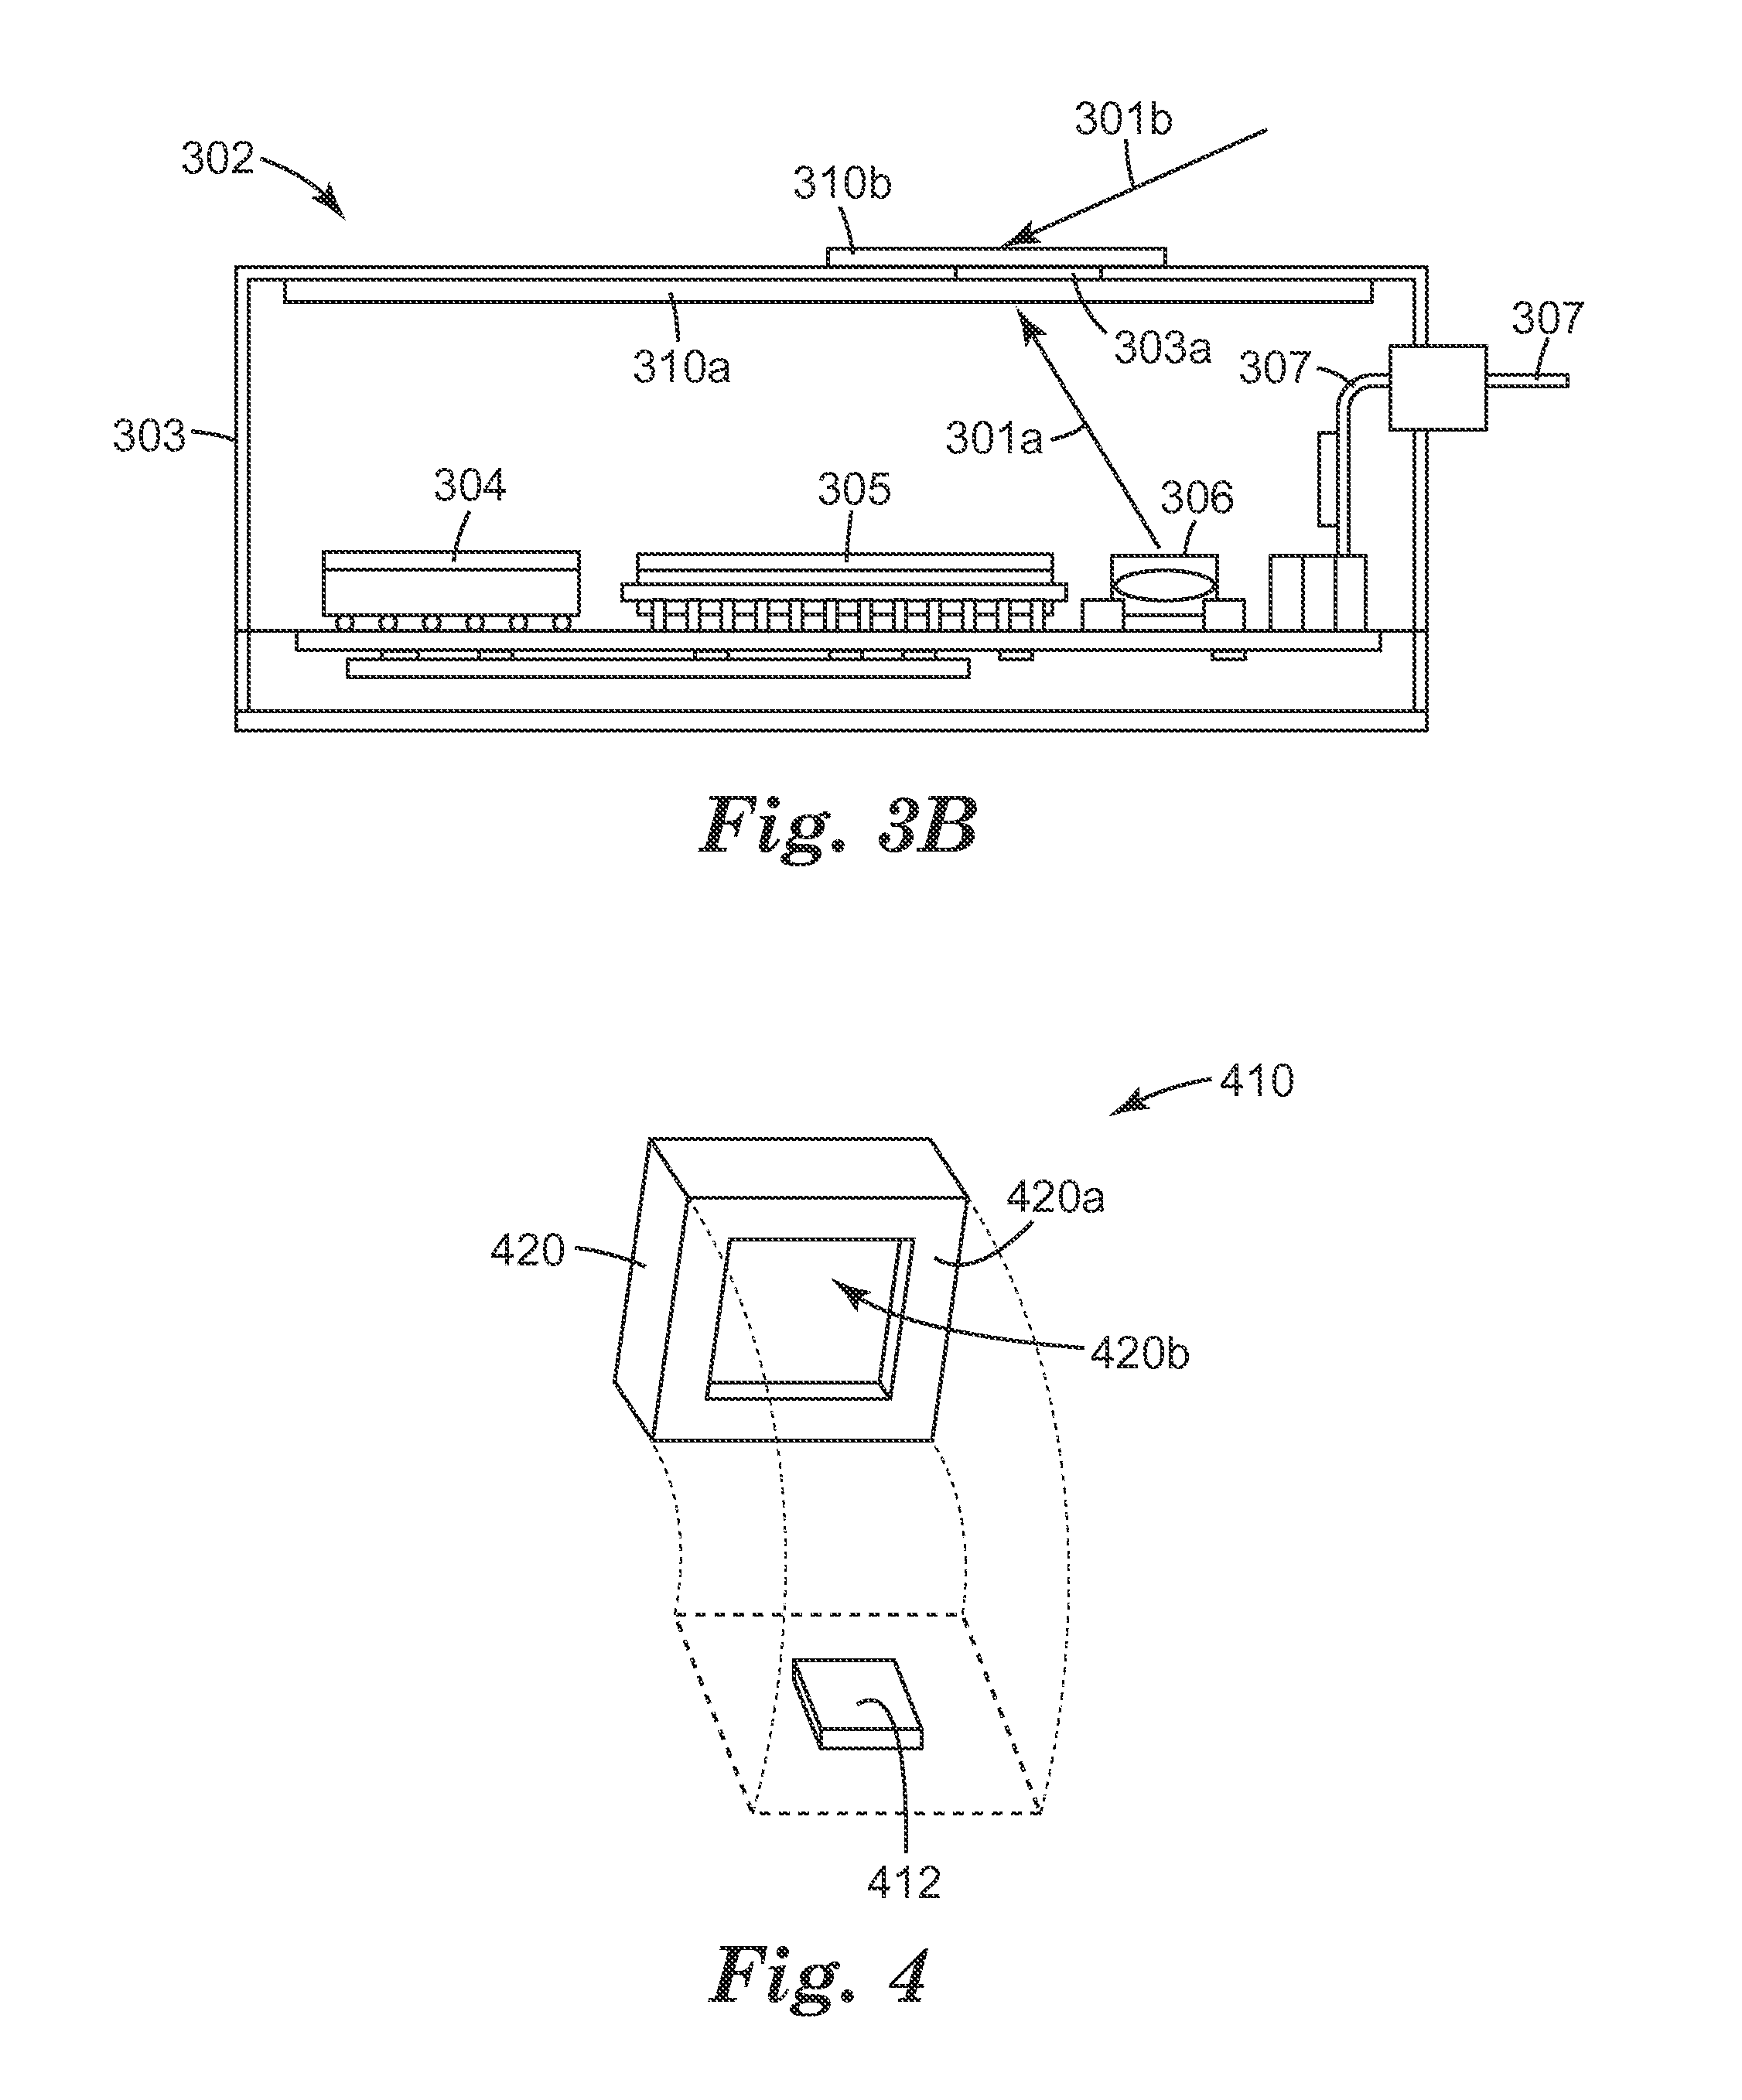 Electromagnetic Interference (EMI) Shielding Products Using Titanium Monoxide (TIO) Based Materials